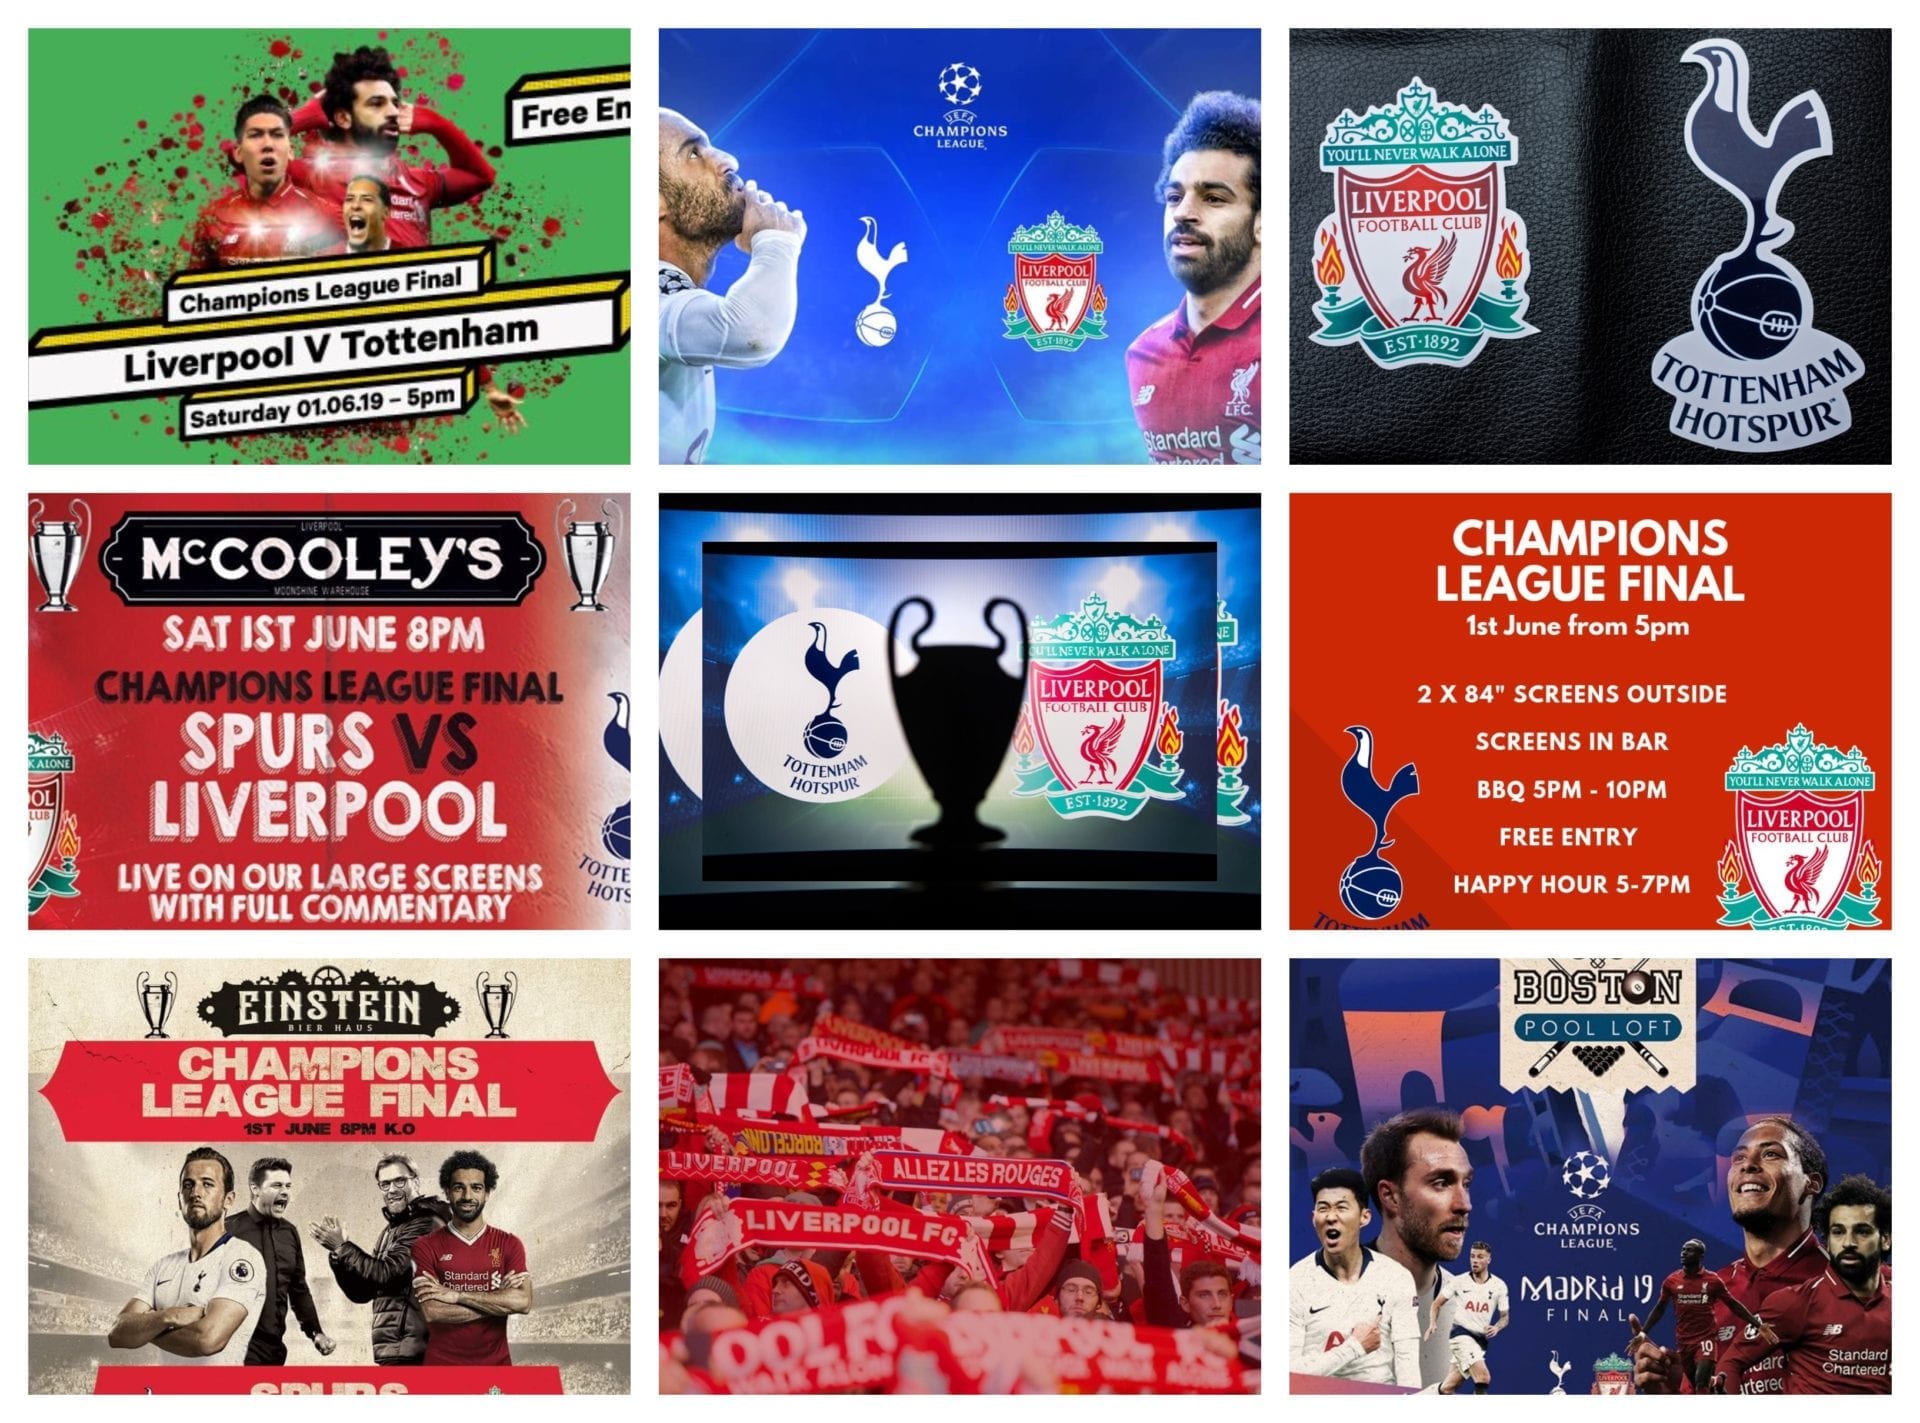 Heres 10 more places you can watch the Champions League final in Liverpool The Guide Liverpool